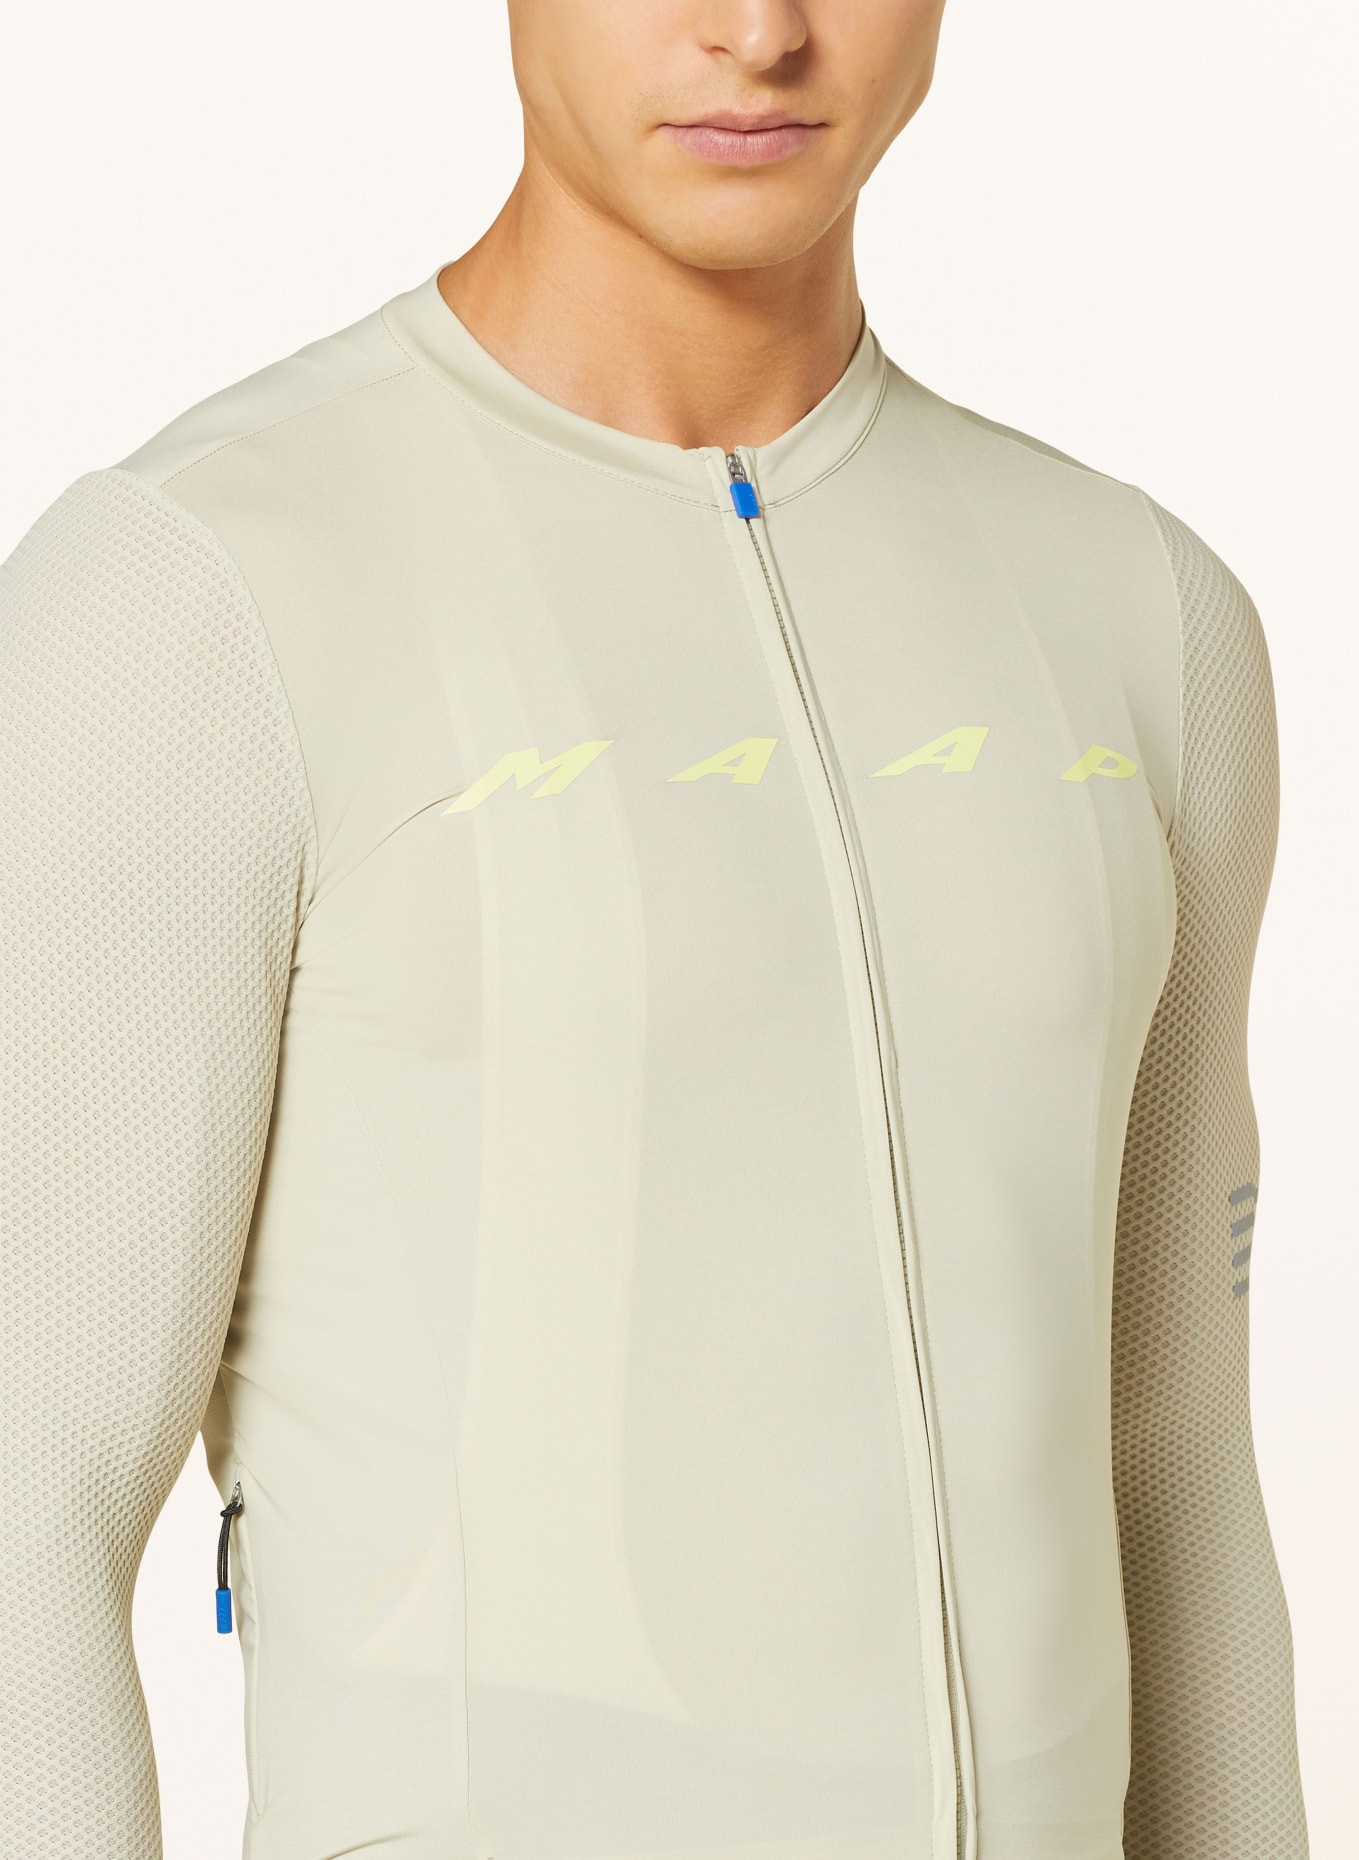 MAAP Cycling jersey EVADE PRO BASE 2.0, Color: LIGHT YELLOW (Image 4)